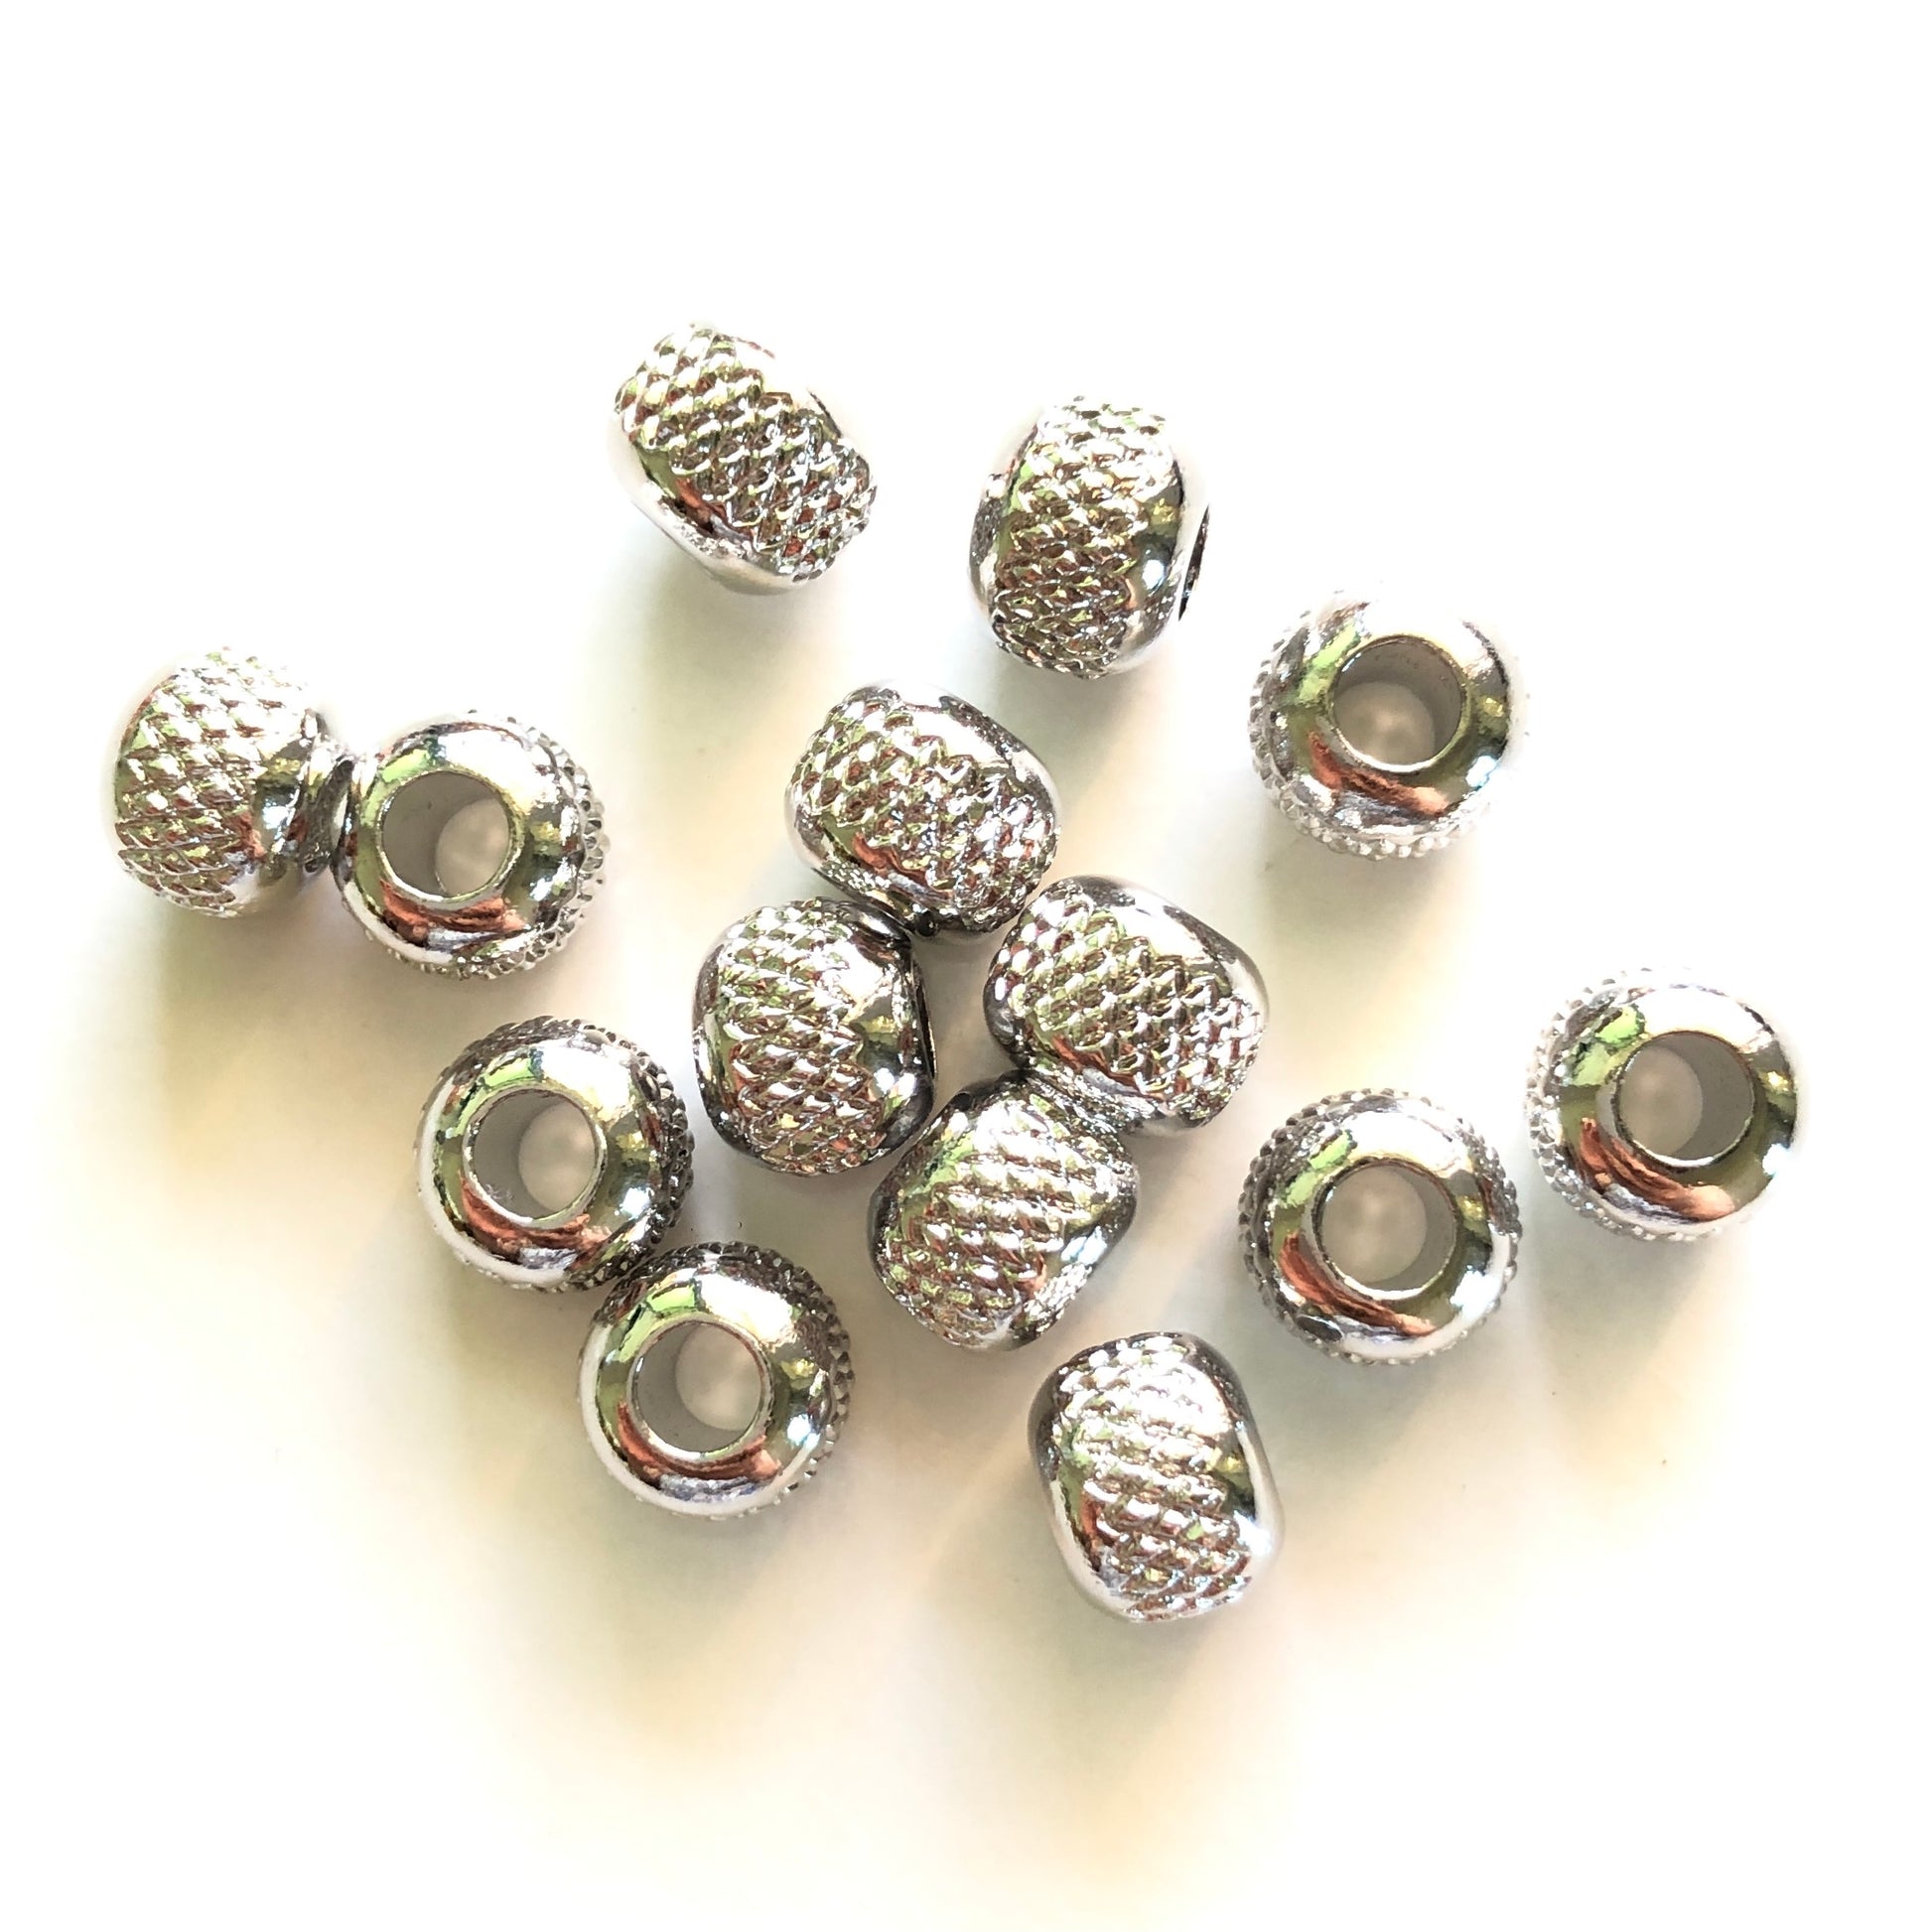 20-50pcs/lot 8.3*6.8mm Pineapple Ball Spacers Silver CZ Paved Spacers Ball Beads Charms Beads Beyond